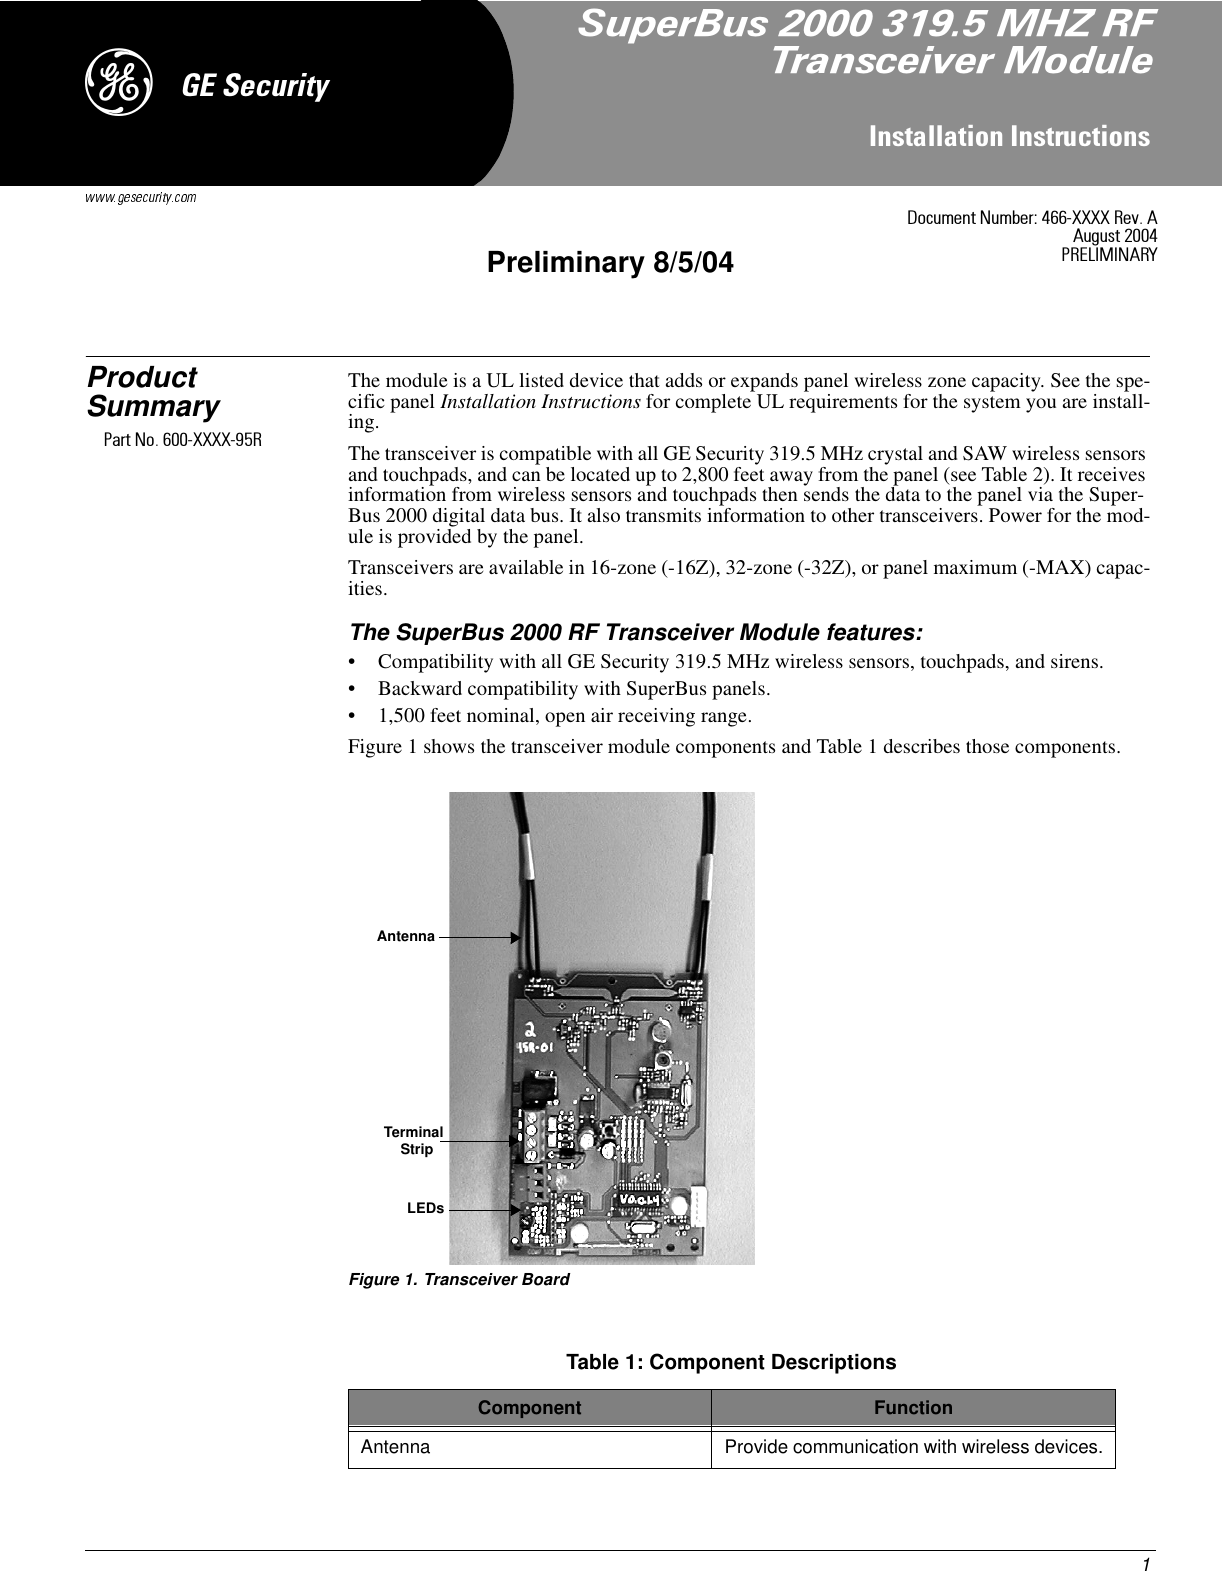 1,QVWDOODWLRQ,QVWUXFWLRQVPreliminary 8/5/04*(6HFXULW\&apos;Product Summary The module is a UL listed device that adds or expands panel wireless zone capacity. See the spe-cific panel Installation Instructions for complete UL requirements for the system you are install-ing.The transceiver is compatible with all GE Security 319.5 MHz crystal and SAW wireless sensors and touchpads, and can be located up to 2,800 feet away from the panel (see Table 2). It receives information from wireless sensors and touchpads then sends the data to the panel via the Super-Bus 2000 digital data bus. It also transmits information to other transceivers. Power for the mod-ule is provided by the panel.Transceivers are available in 16-zone (-16Z), 32-zone (-32Z), or panel maximum (-MAX) capac-ities.The SuperBus 2000 RF Transceiver Module features:• Compatibility with all GE Security 319.5 MHz wireless sensors, touchpads, and sirens.• Backward compatibility with SuperBus panels.• 1,500 feet nominal, open air receiving range.Figure 1 shows the transceiver module components and Table 1 describes those components.Figure 1. Transceiver BoardTable 1: Component DescriptionsComponent FunctionAntenna Provide communication with wireless devices.AntennaLEDsTerminalStrip&apos;RFXPHQW1XPEHU;;;;5HY$$XJXVW35(/,0,1$5&lt;6XSHU%XV0+=5)7UDQVFHLYHU0RGXOH3DUW1R;;;;5